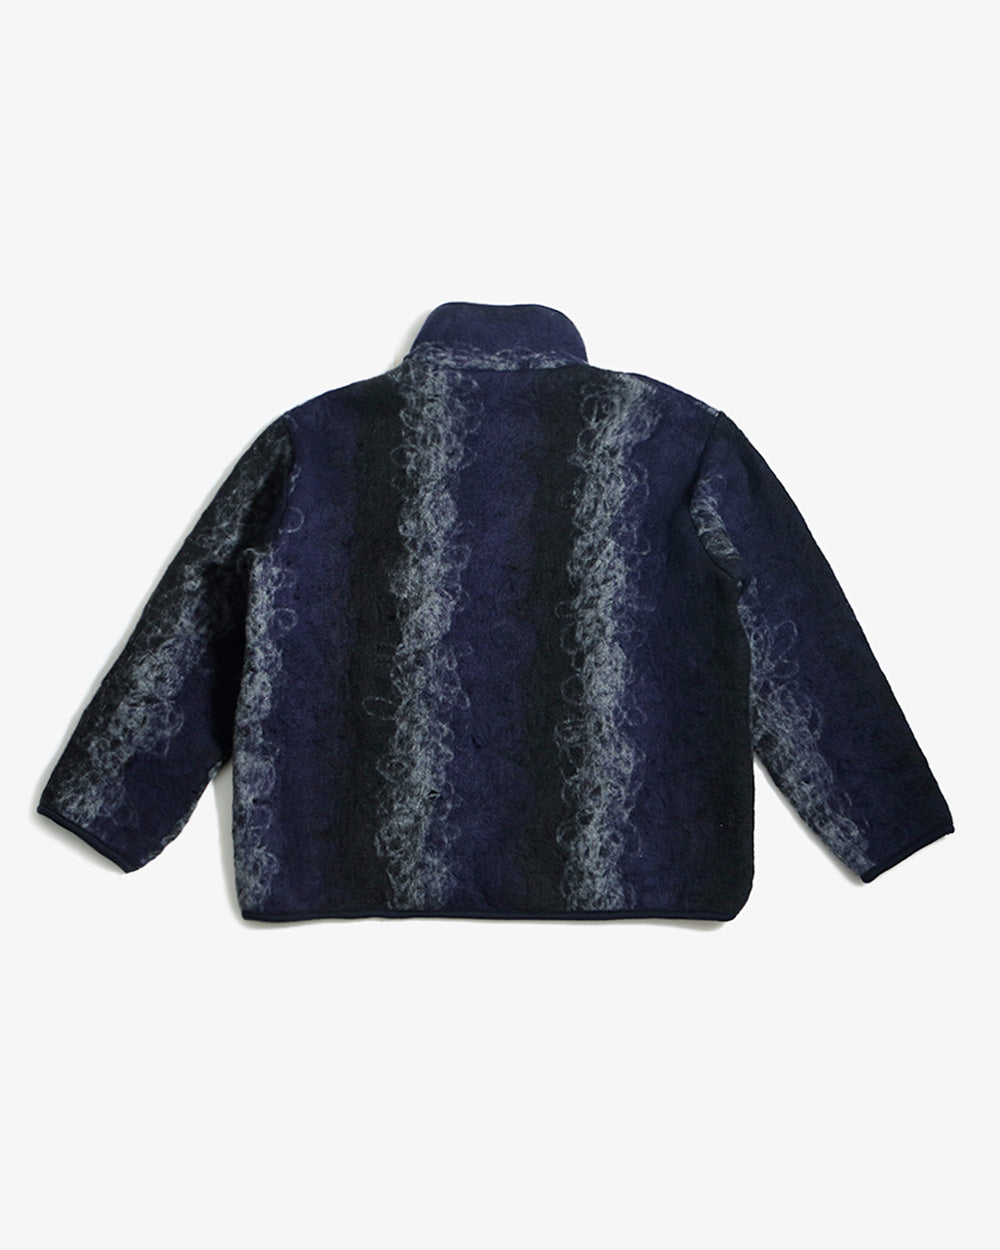 Button-Up Pullover Black And Navy